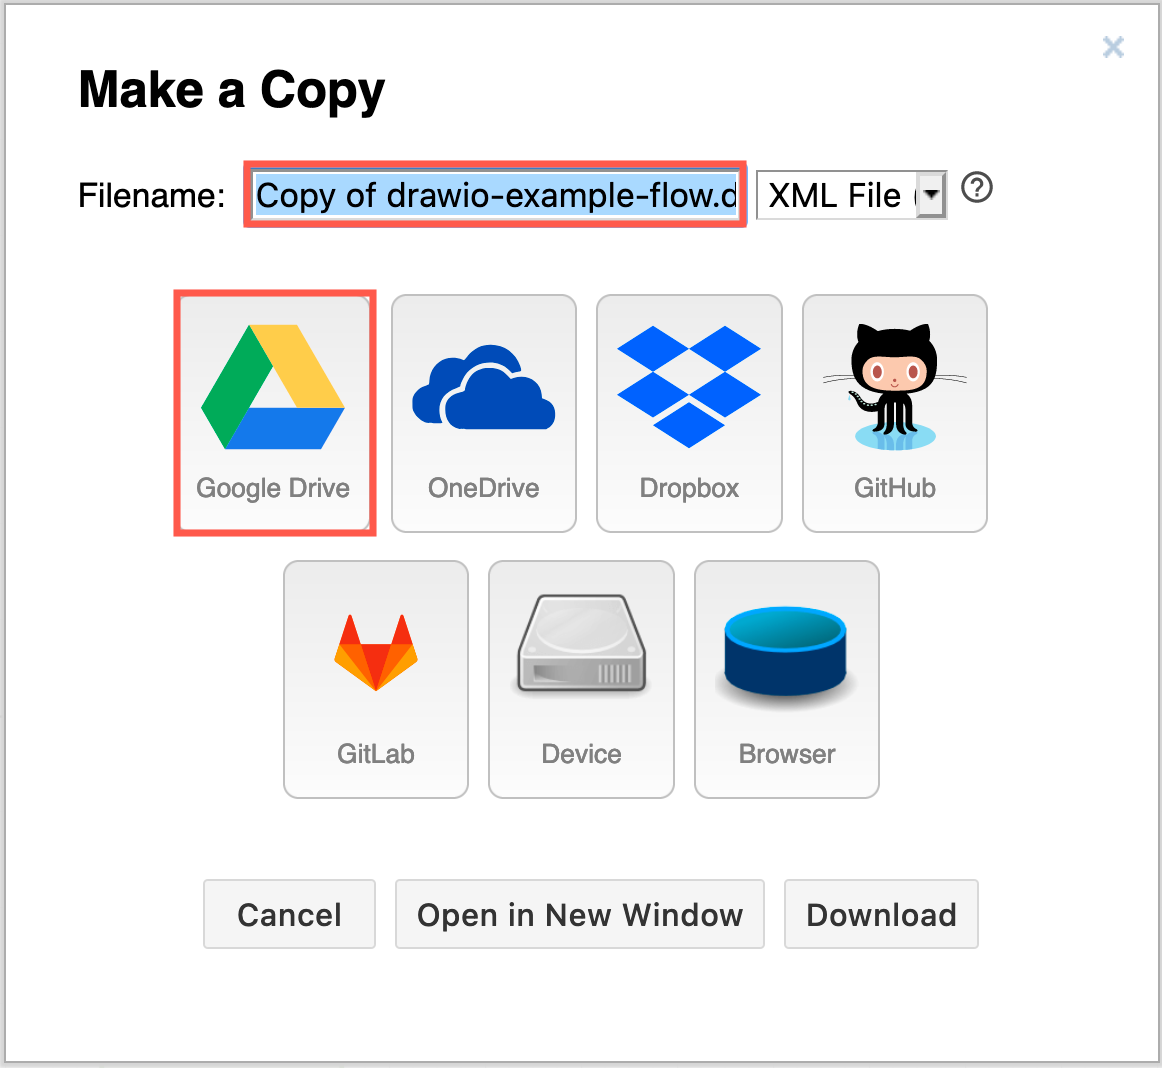 Edit the the filename, then click on Google Drive to save a copy in your current Google Drive folder.